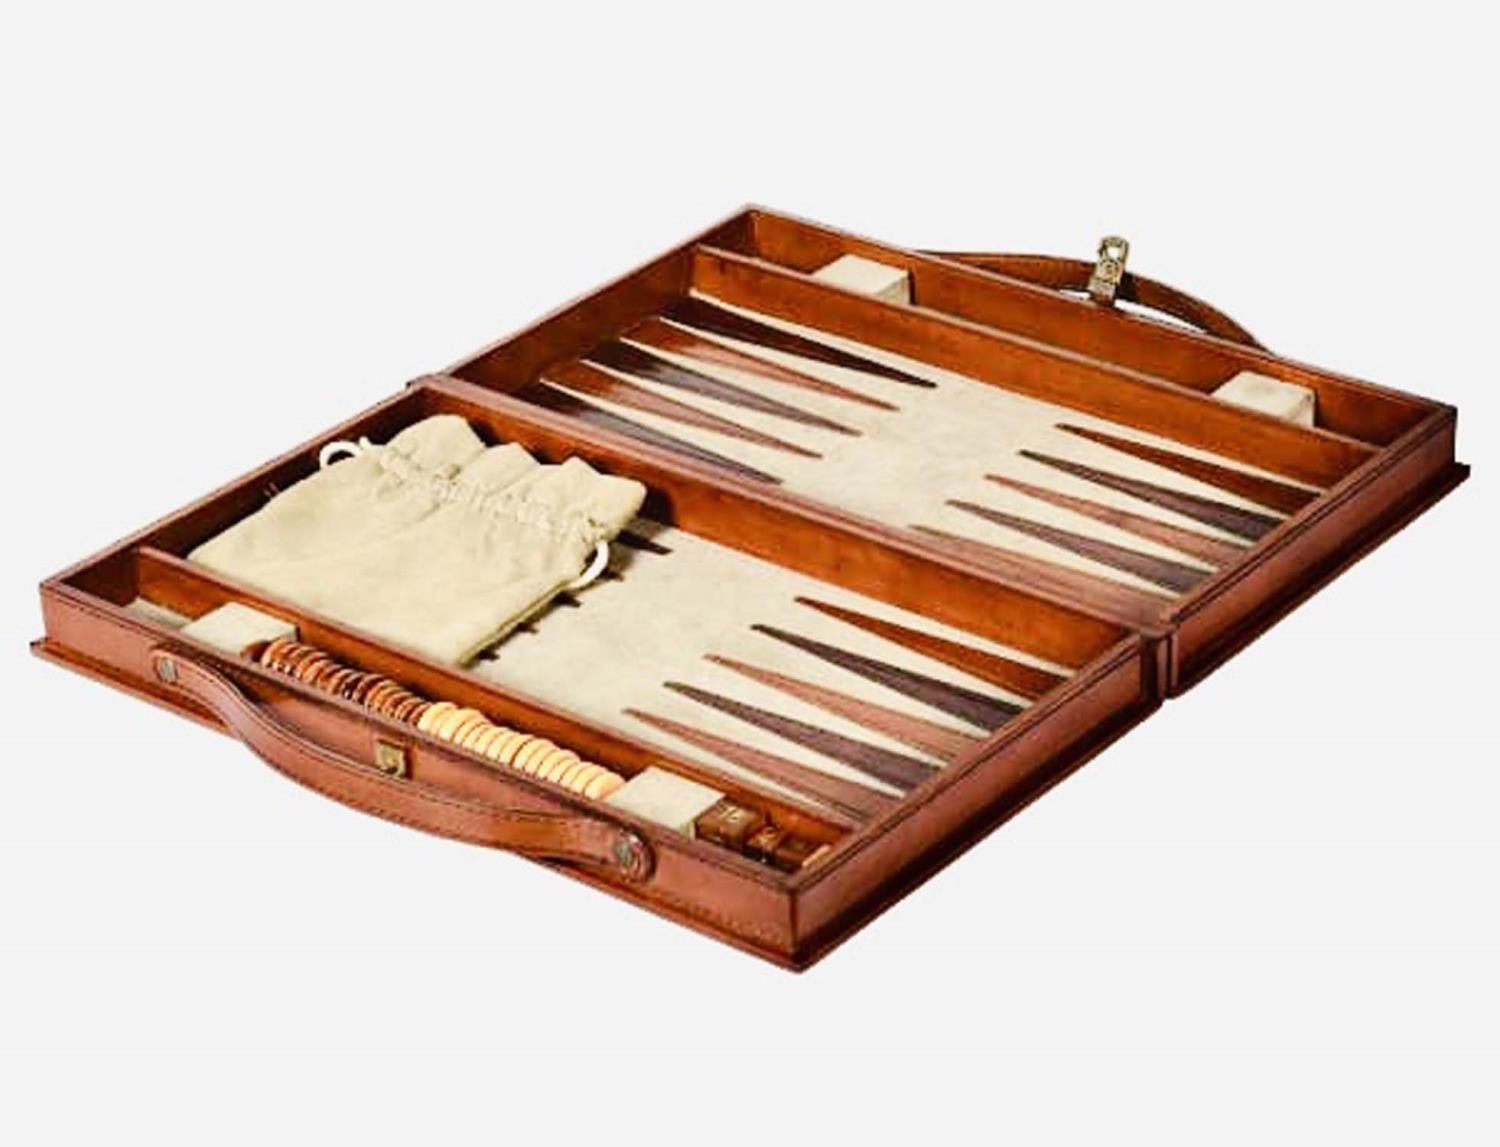 BACKGAMMON SET, in a leathered case, 40cm W x 23cm H x 7cm D.